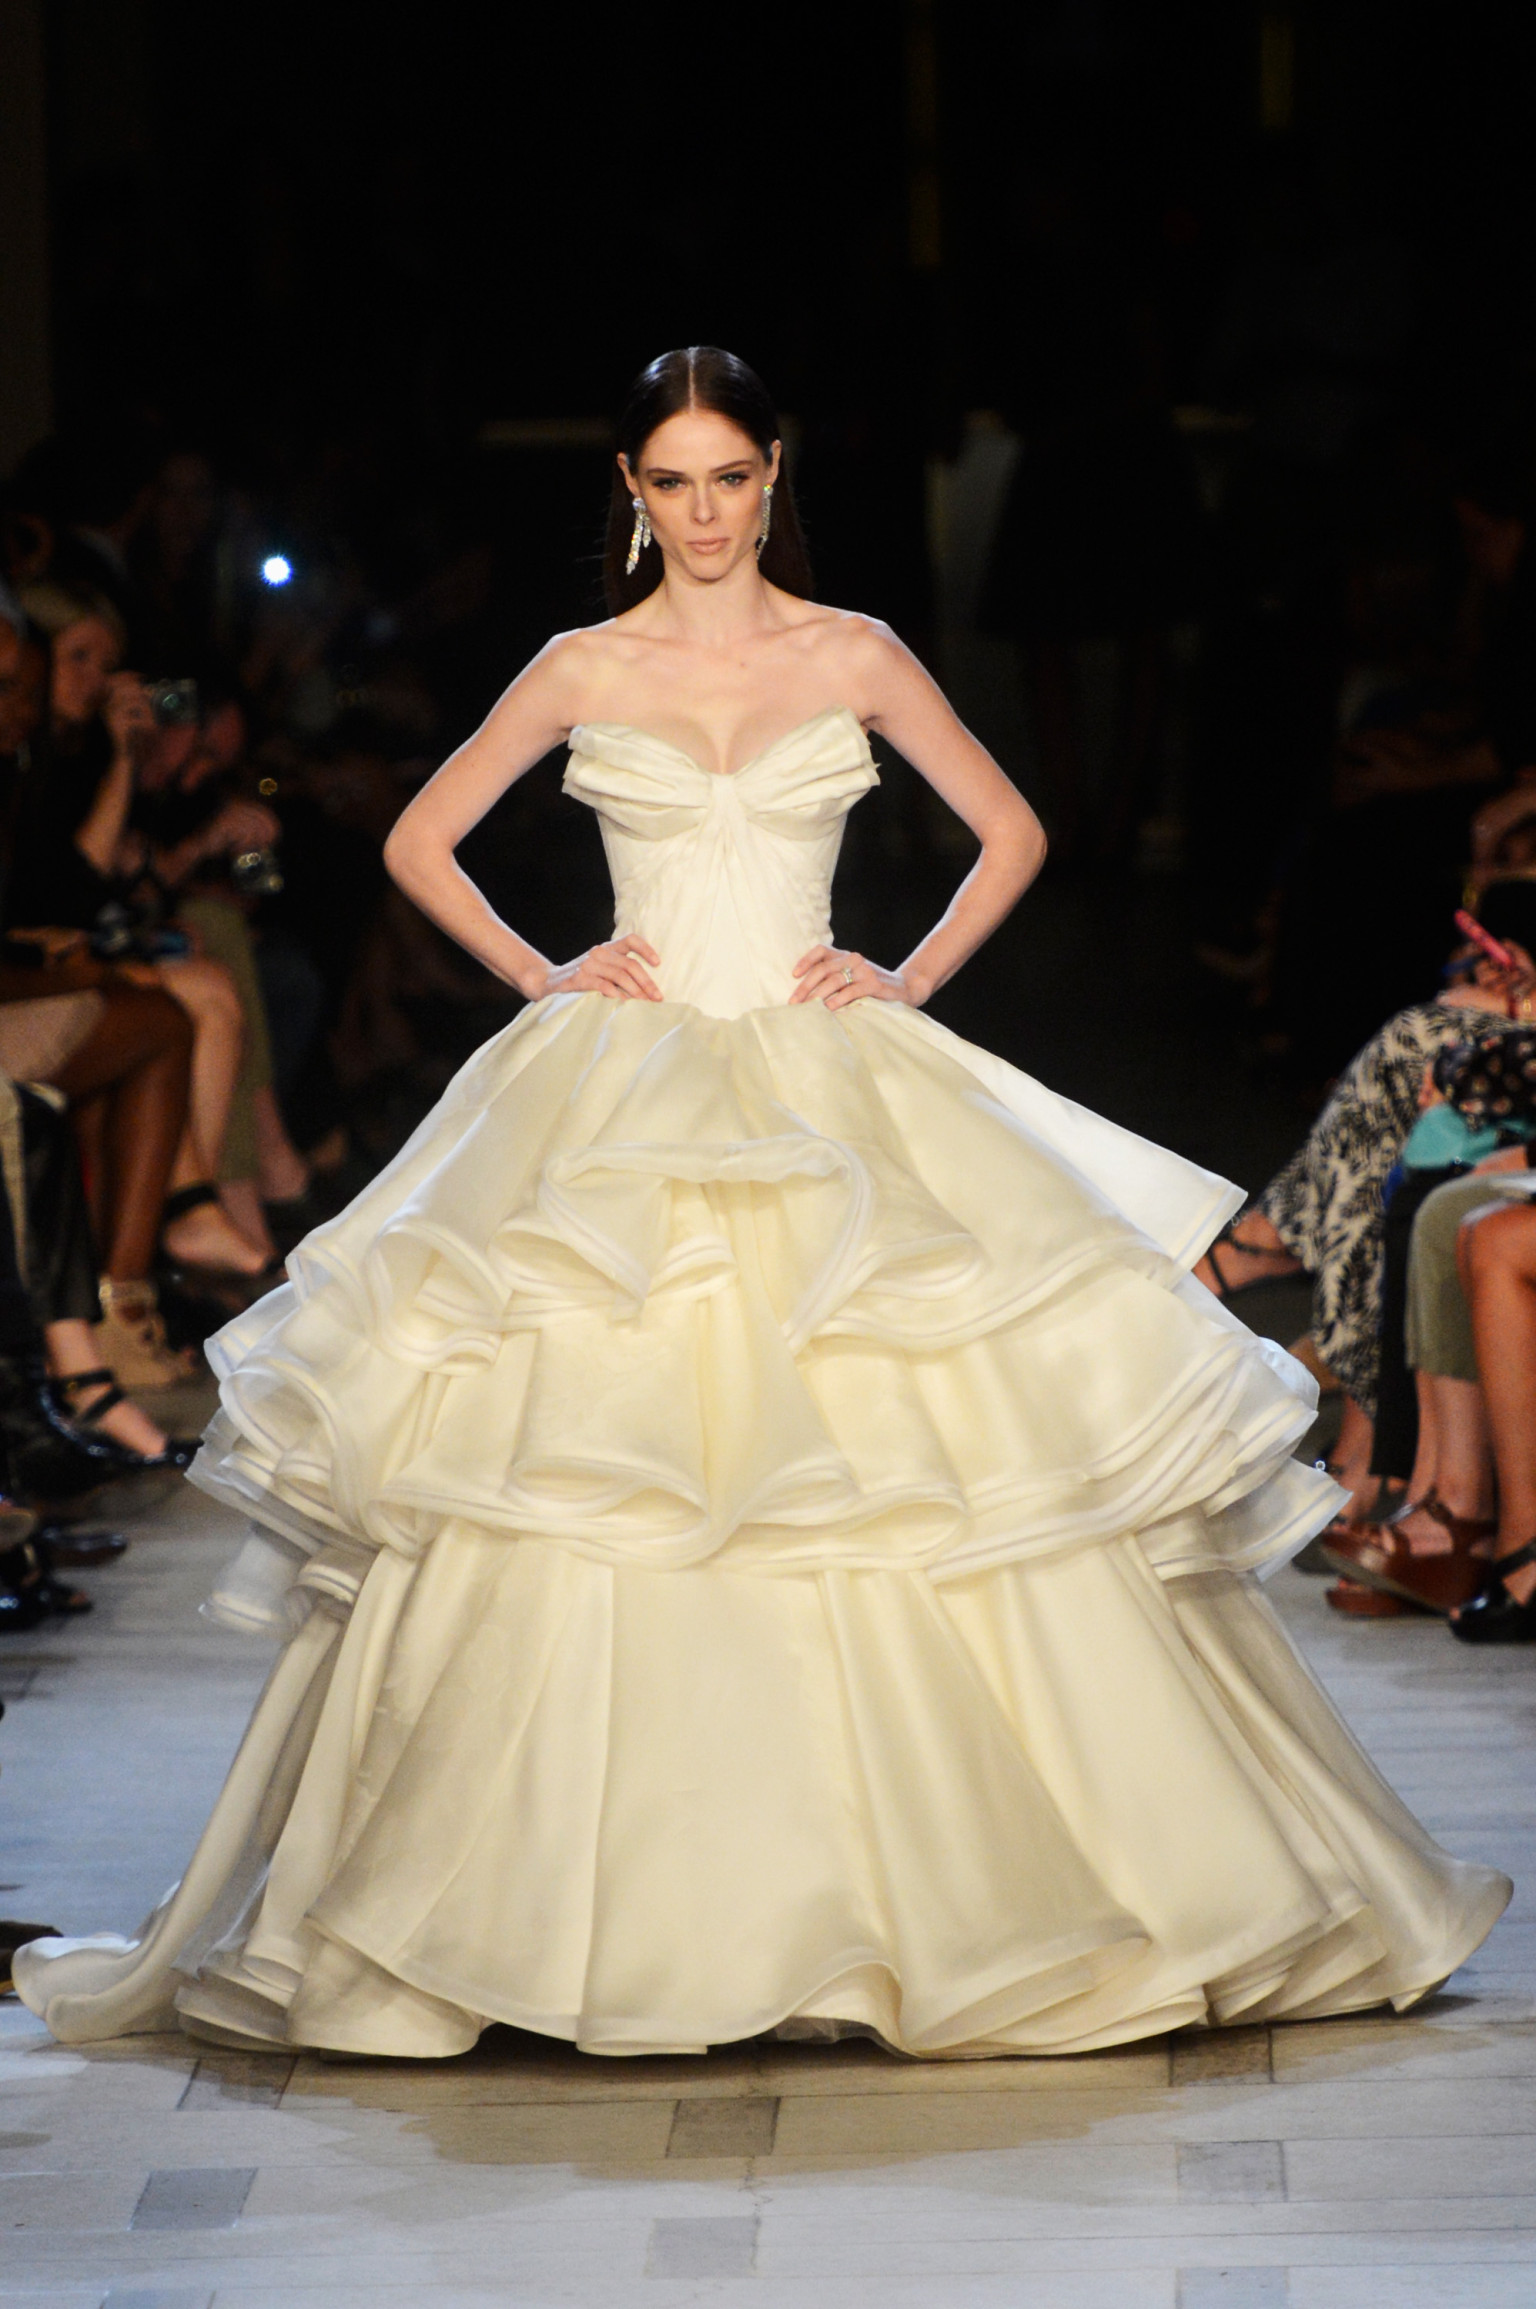 Coco Rocha, Zac Posen's Signature Model, Turns 24 Just Hours After She ...